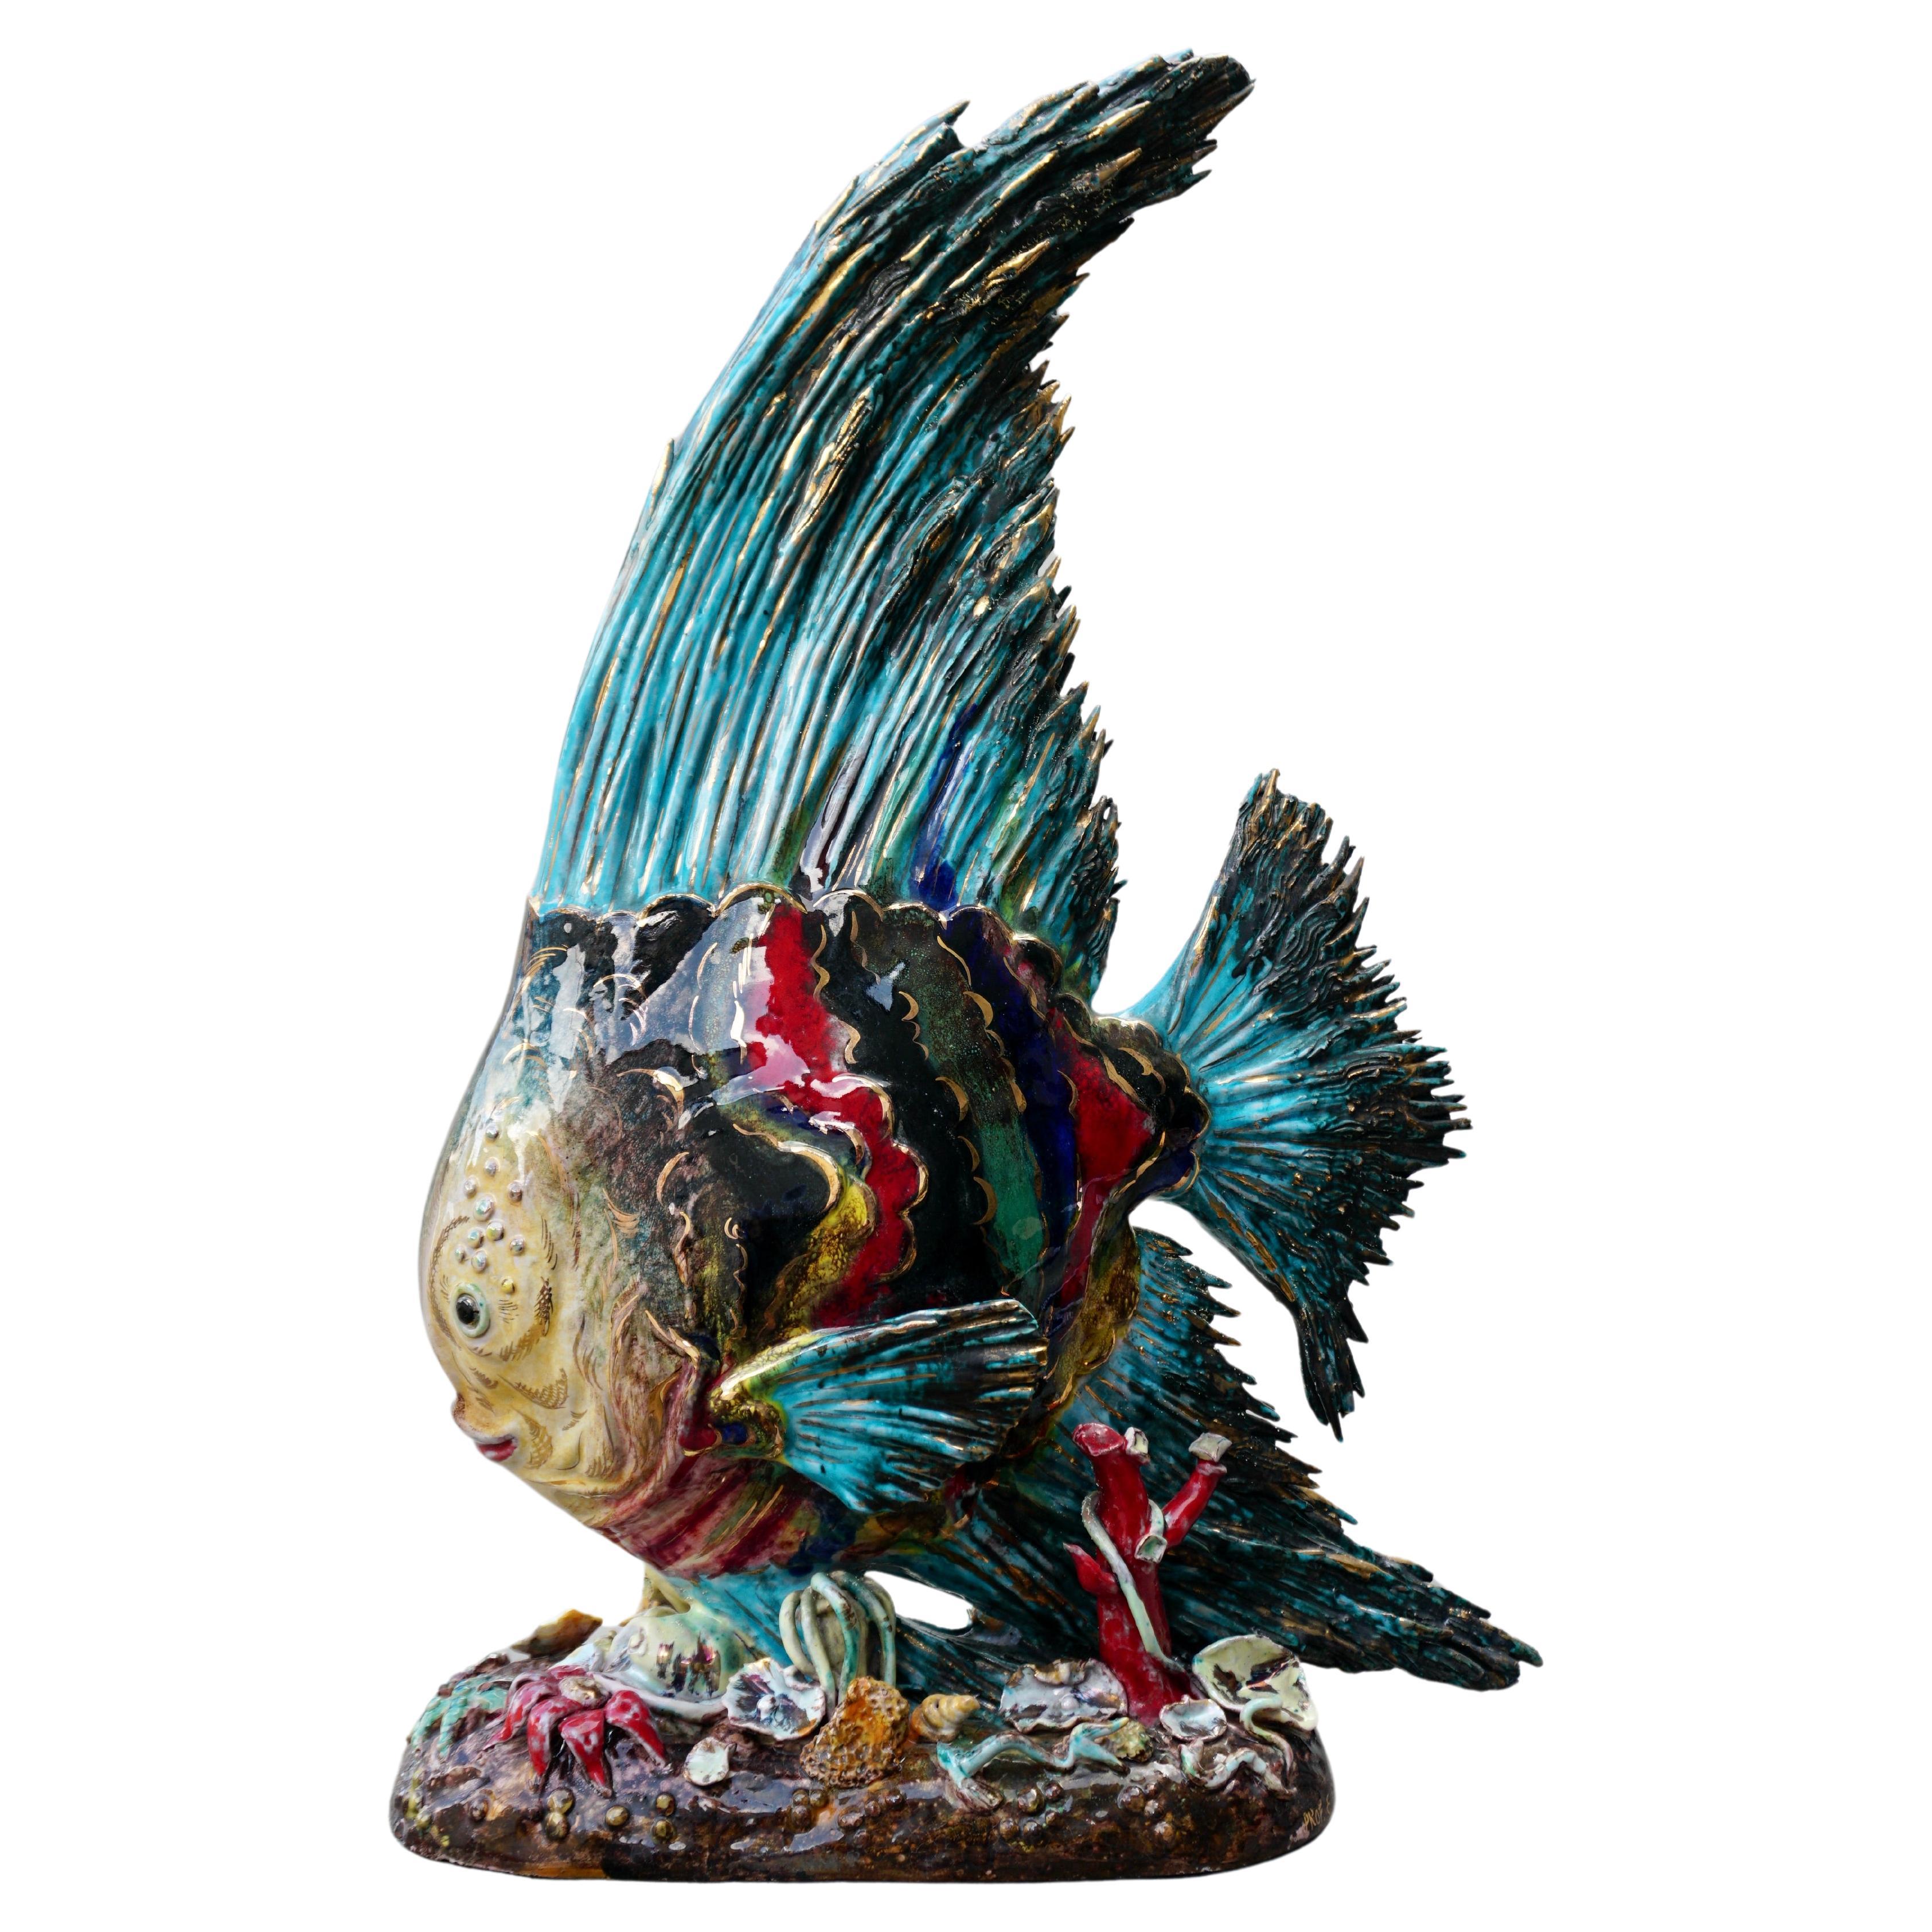 Larger than Life Figural Fish Lamp by E. Pattarino for Marbro For Sale